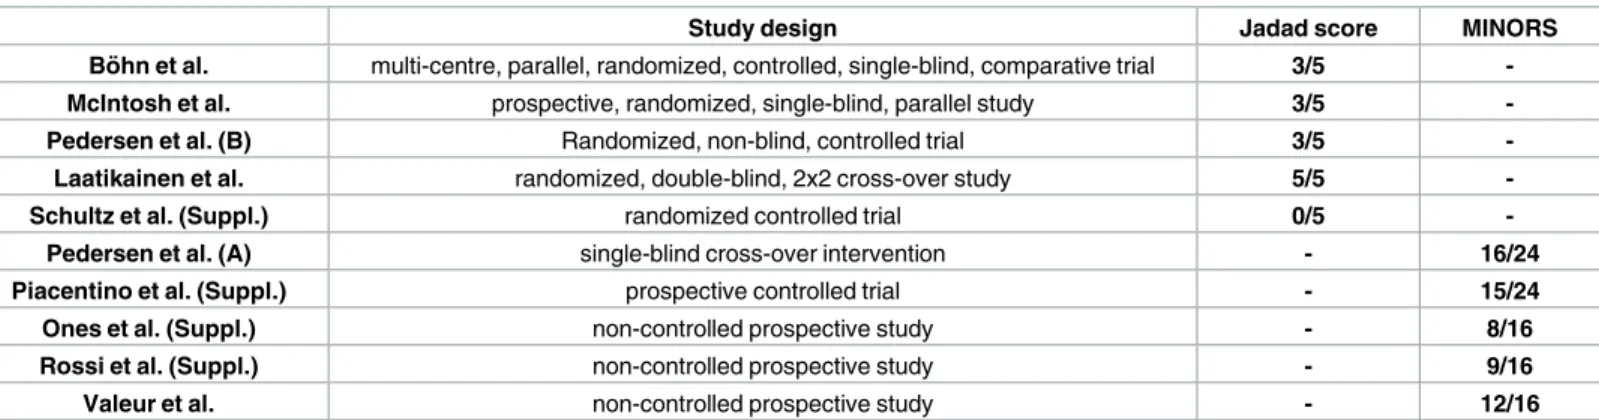 Table 3. Quality assessment of the studies included in the meta-analysis.